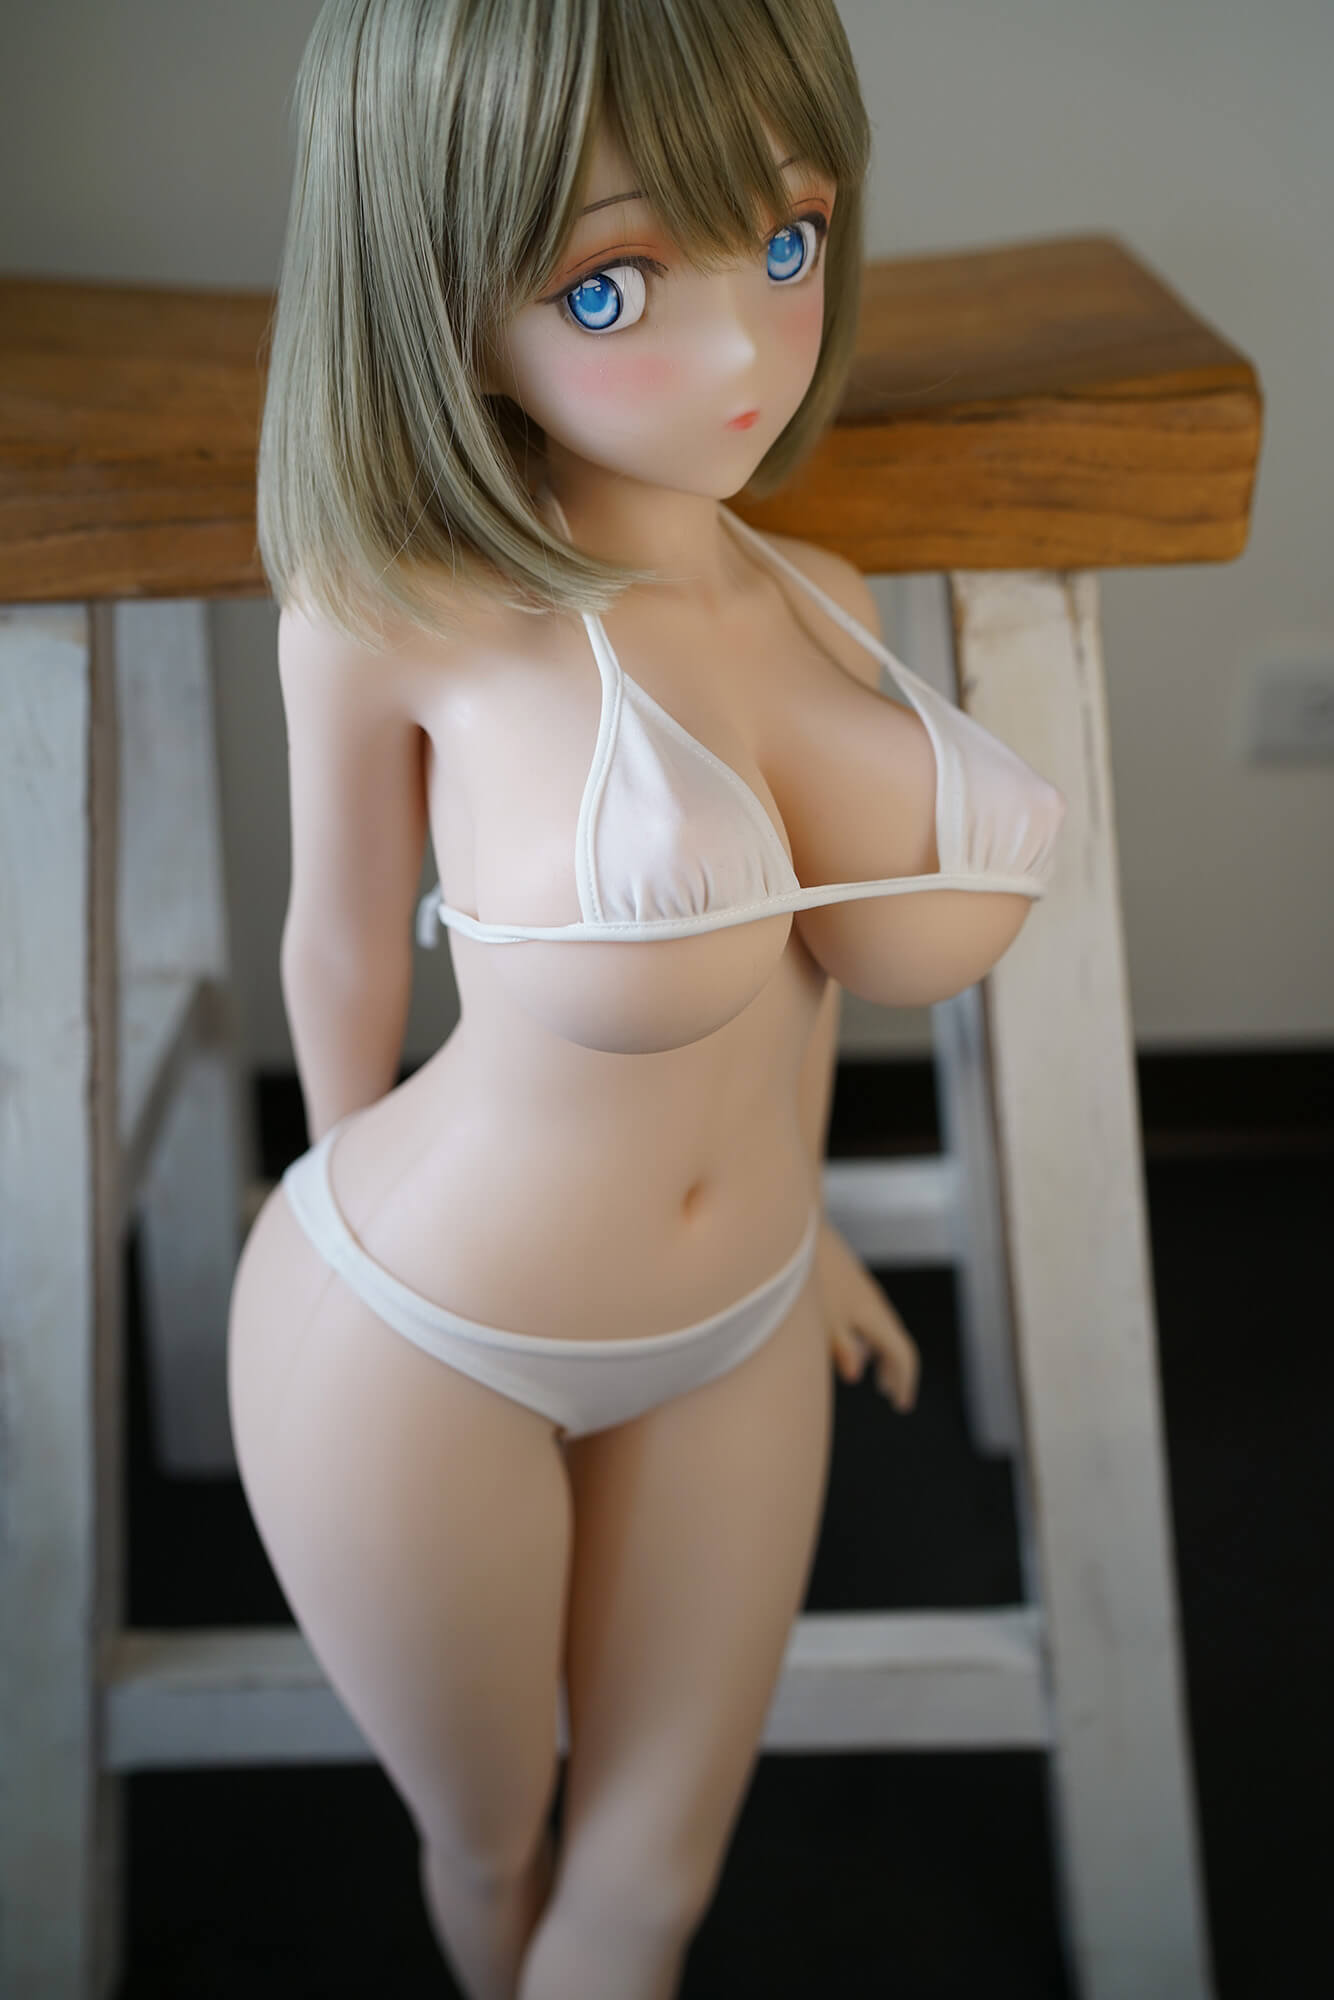 Tiny Anime Sex Doll With Gray Wig